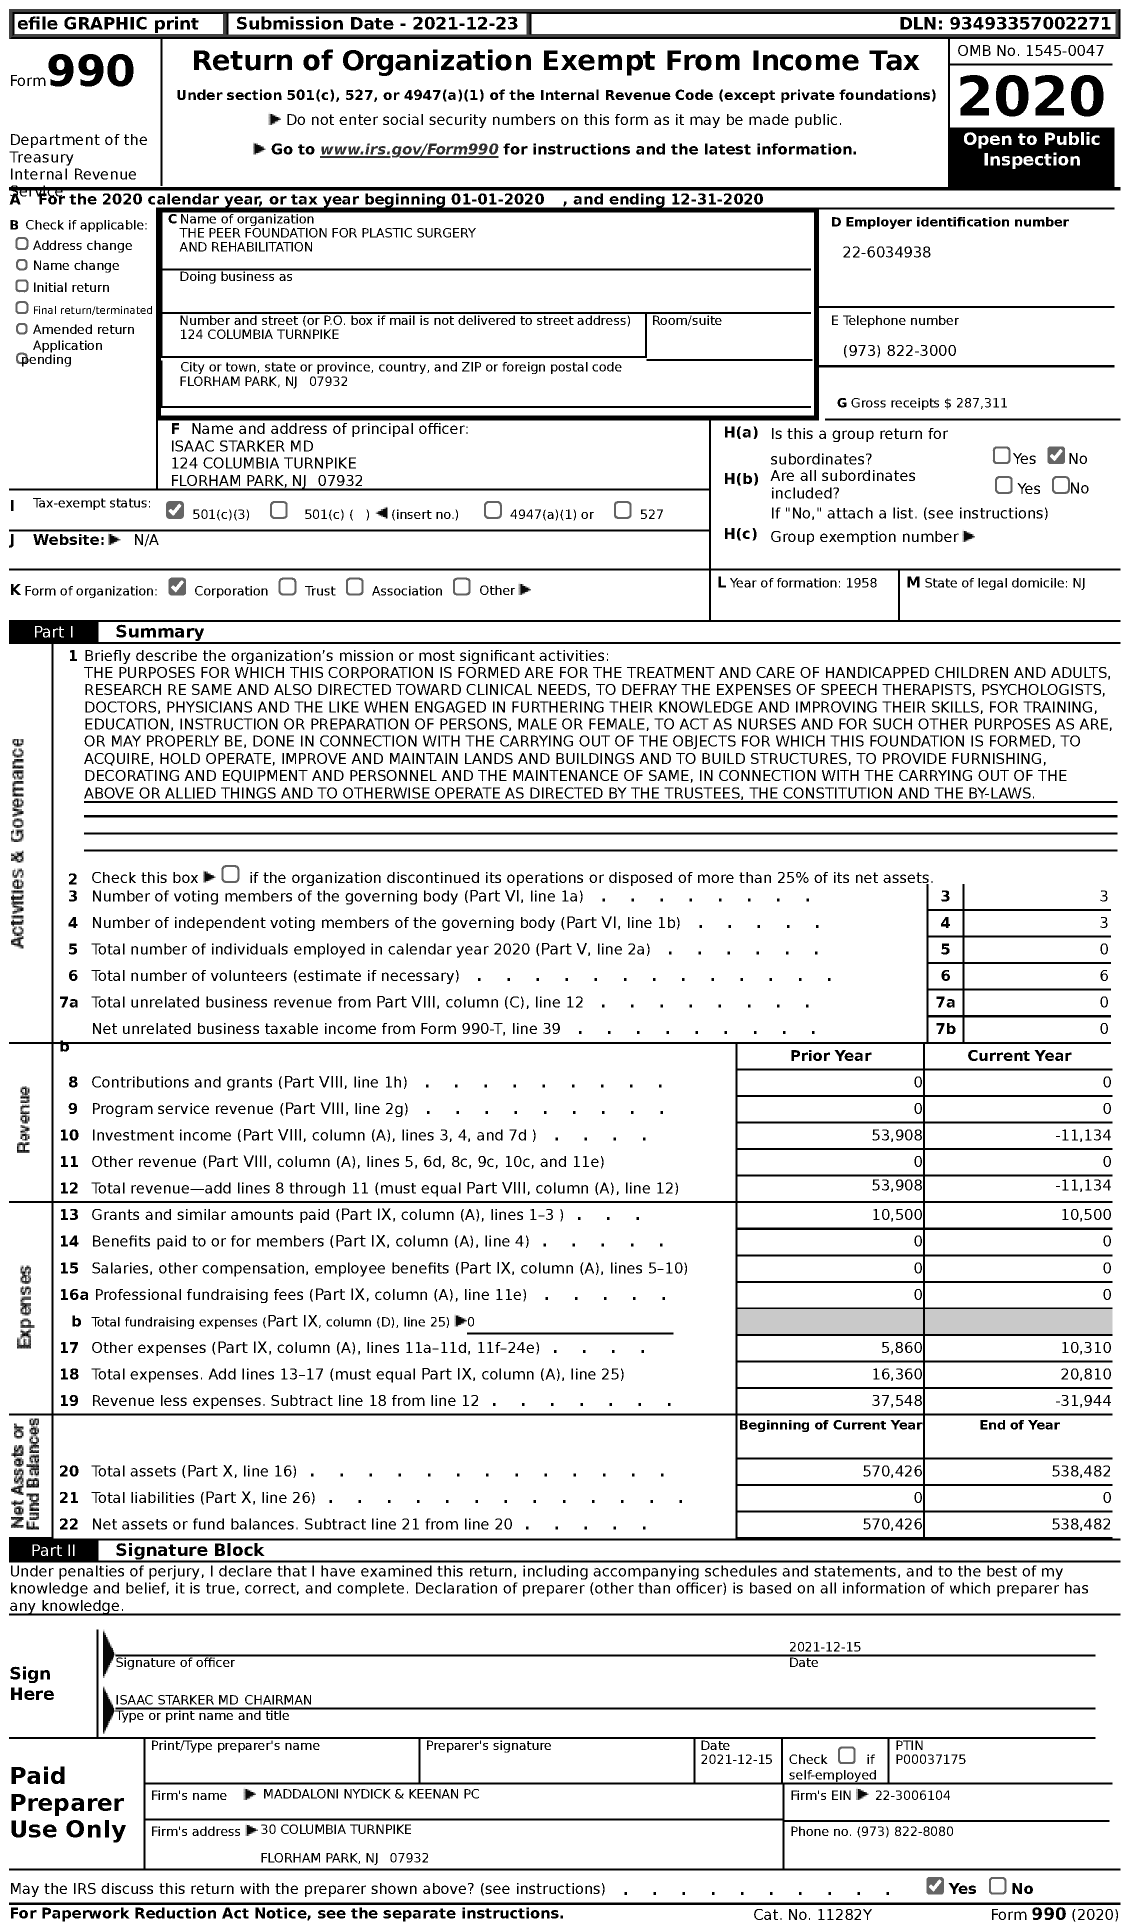 Image of first page of 2020 Form 990 for The Peer Foundation for Plastic Surgery and Rehabilitation